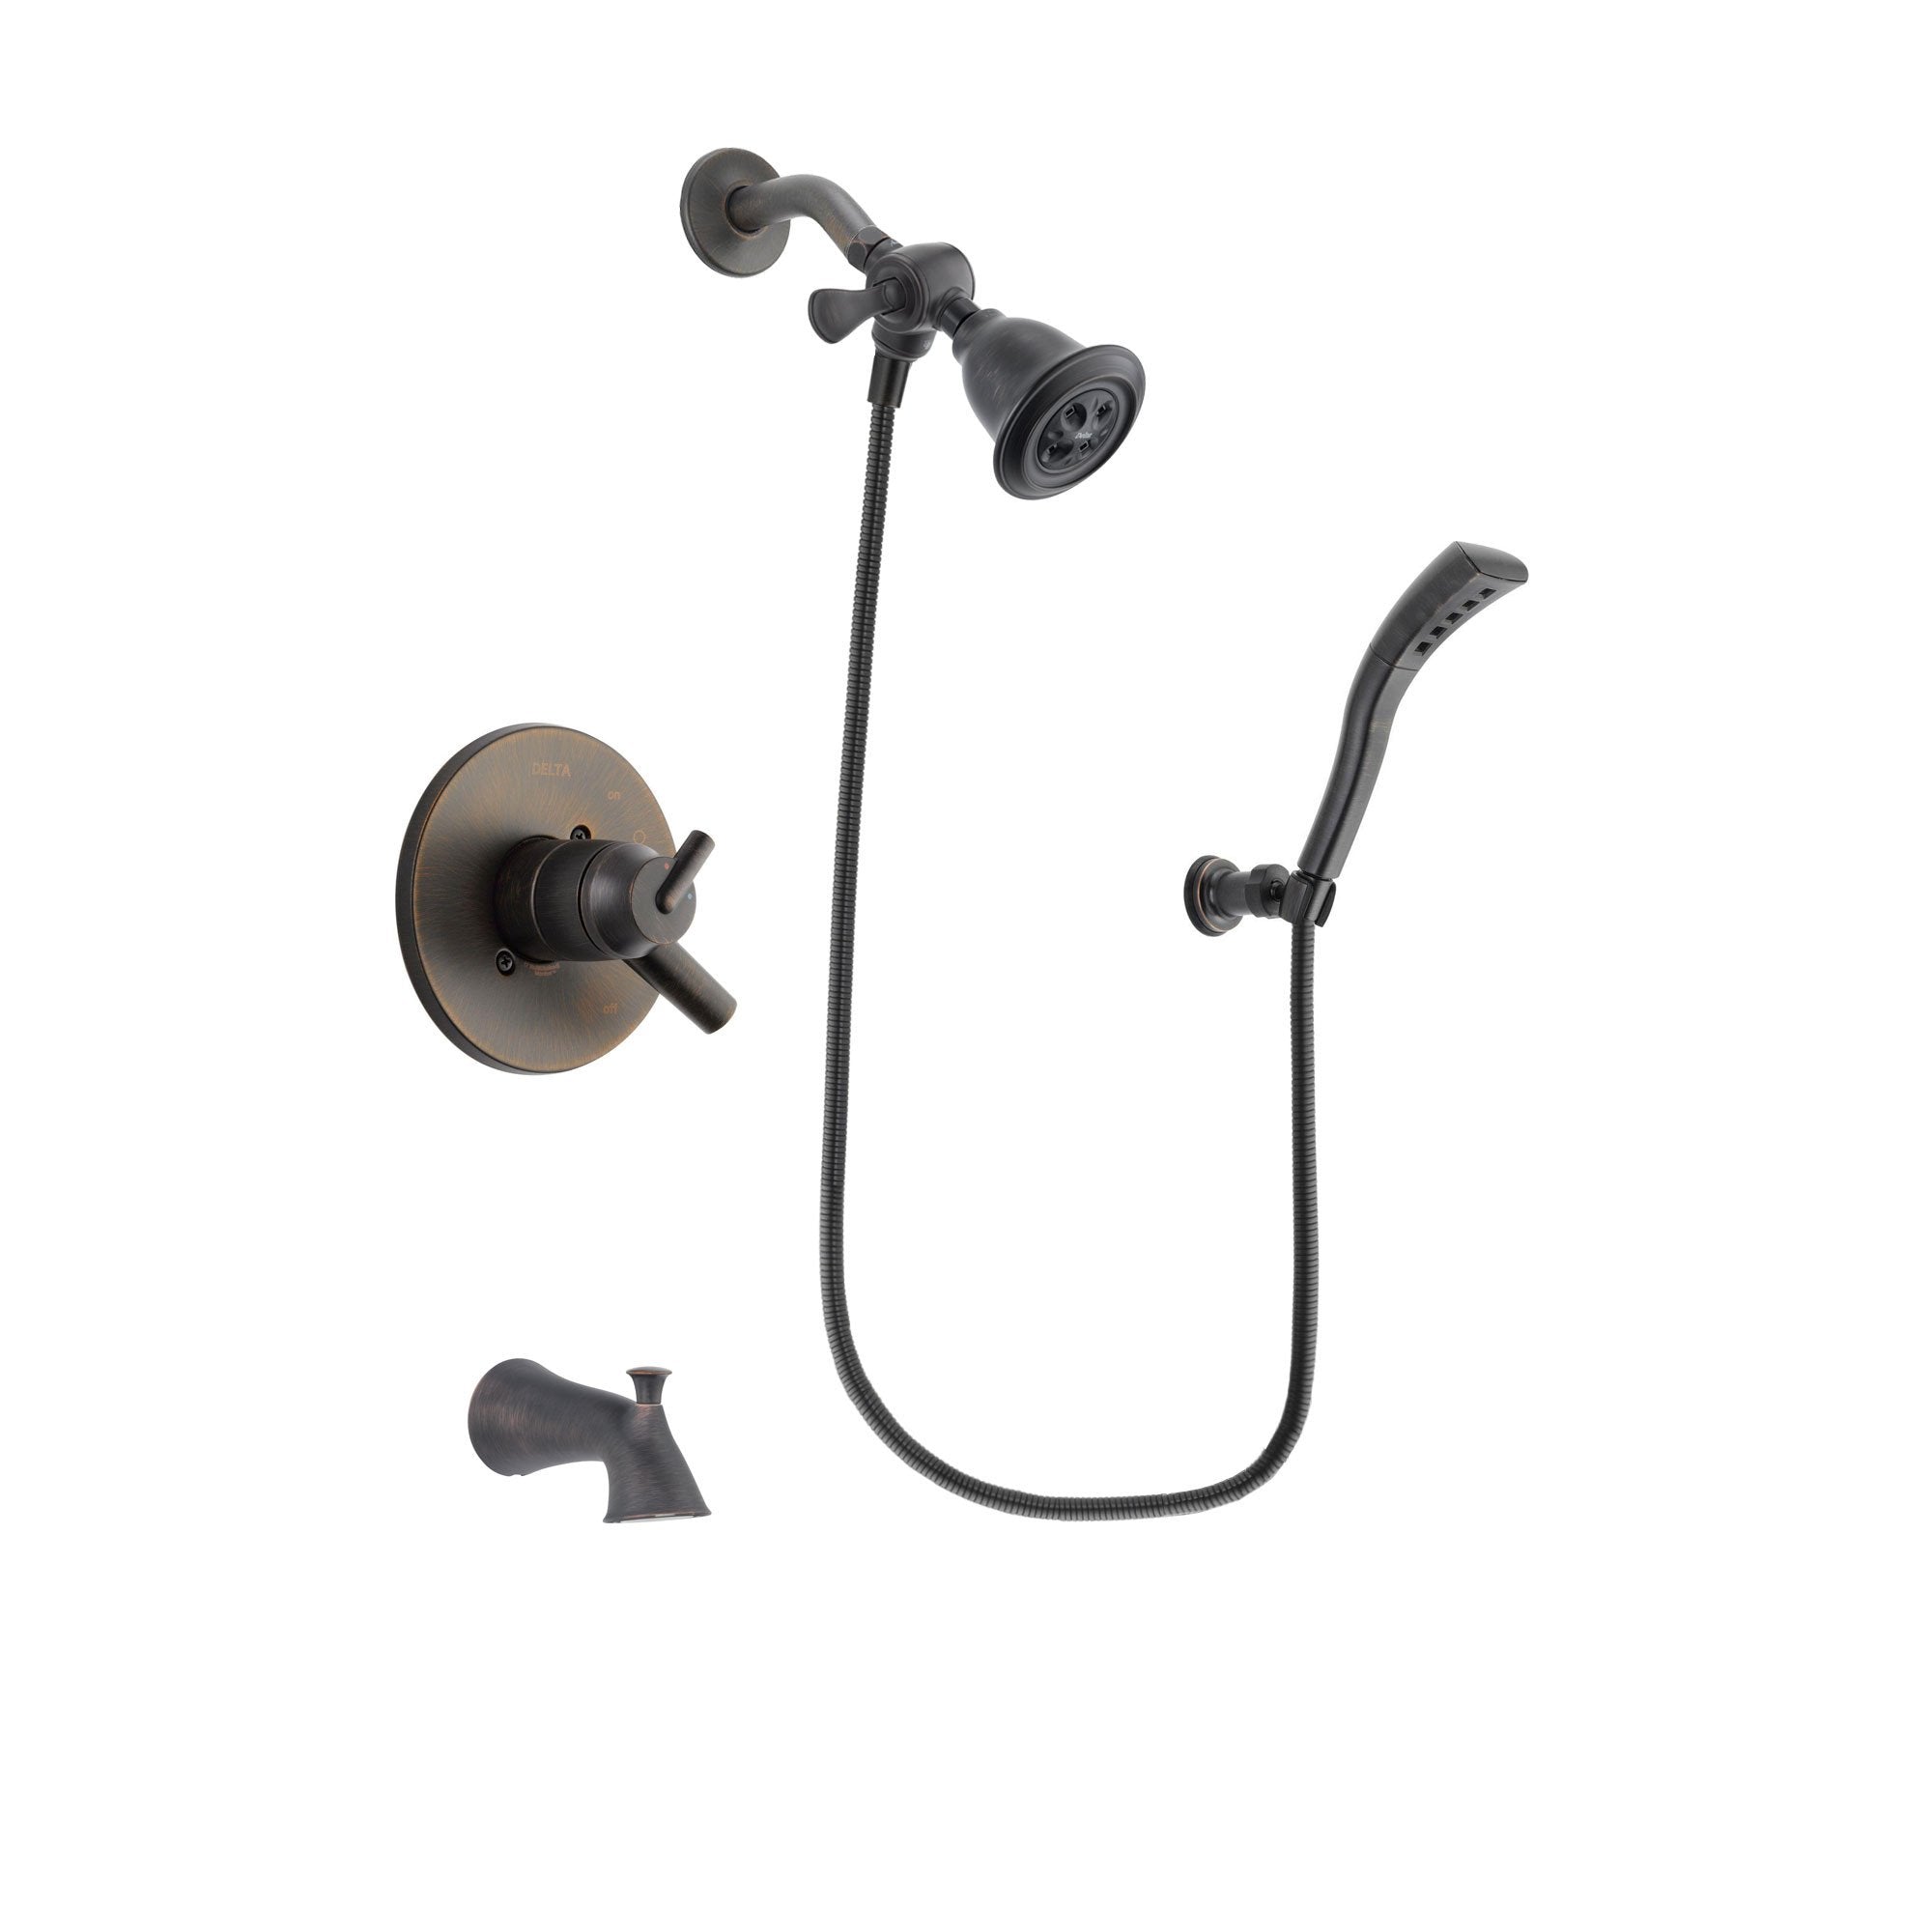 Delta Trinsic Venetian Bronze Finish Dual Control Tub and Shower Faucet System Package with Water Efficient Showerhead and Modern Wall Mount Personal Handheld Shower Spray Includes Rough-in Valve and Tub Spout DSP2911V